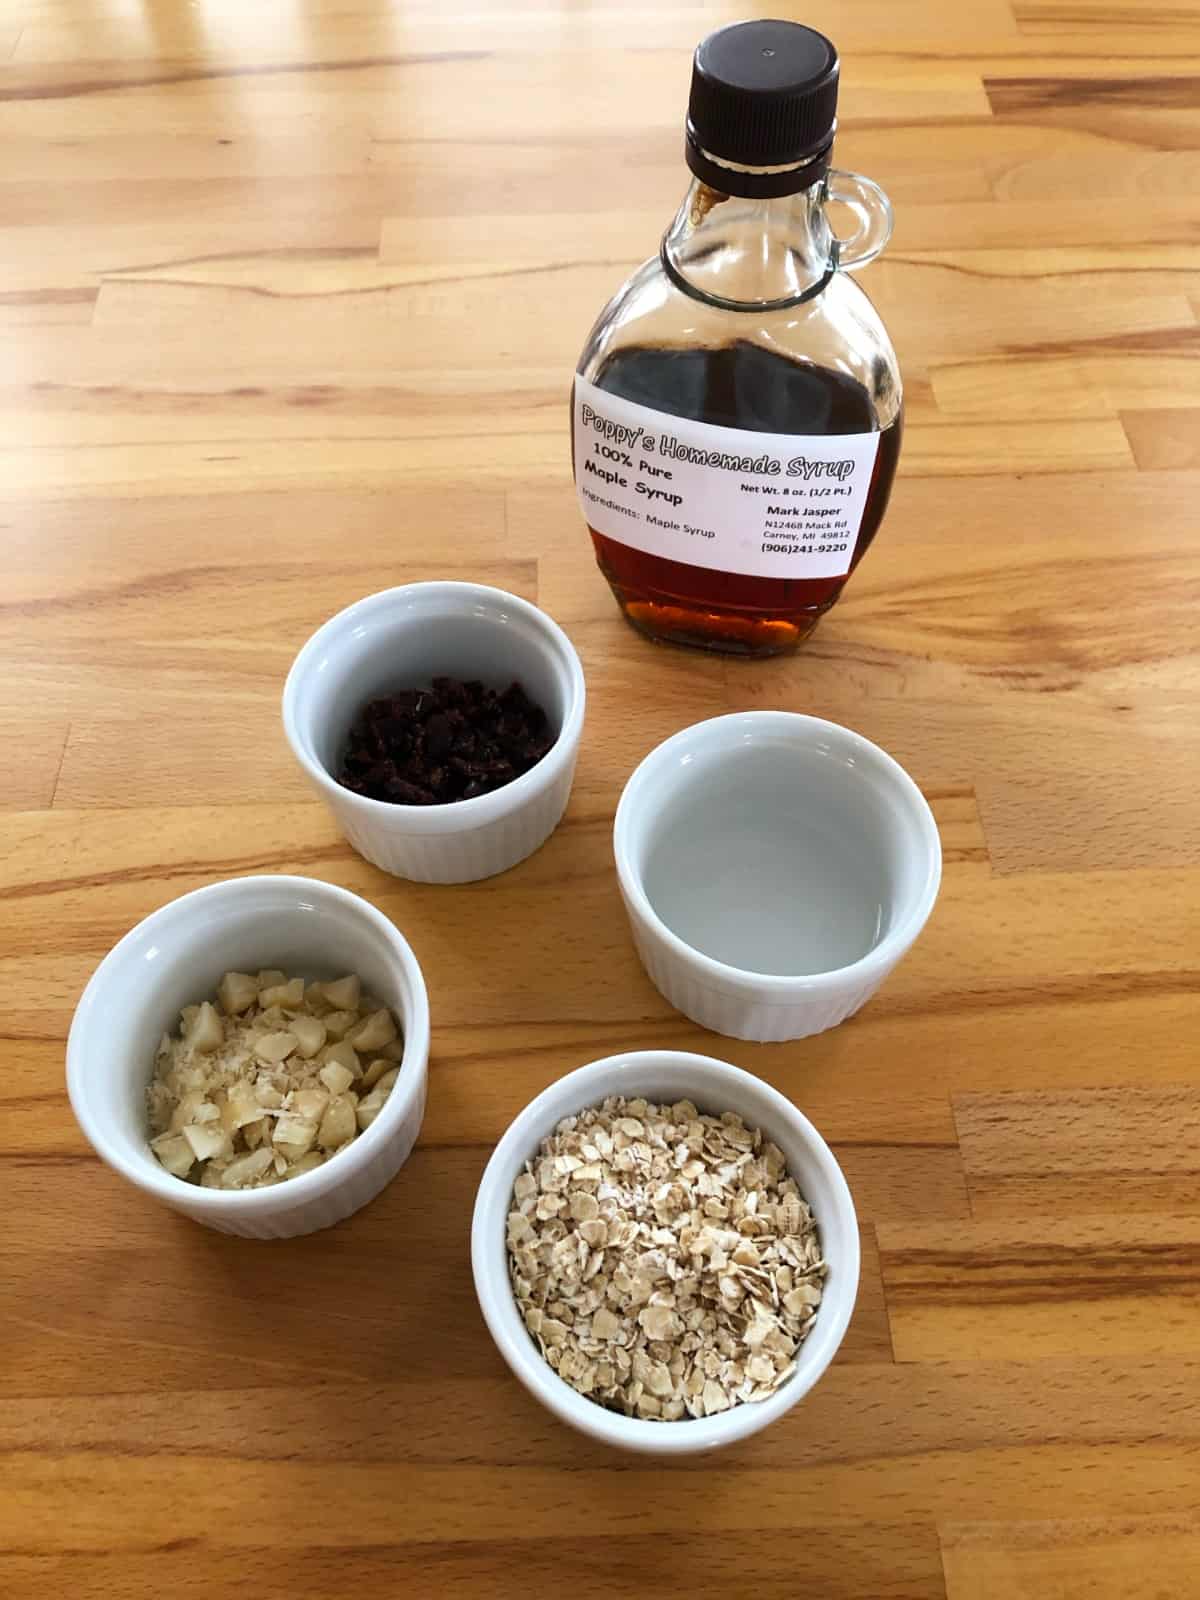 Ingredients for making granola, including maple syrup, oats, coconut oil, raisins and chopped macadamia nuts.